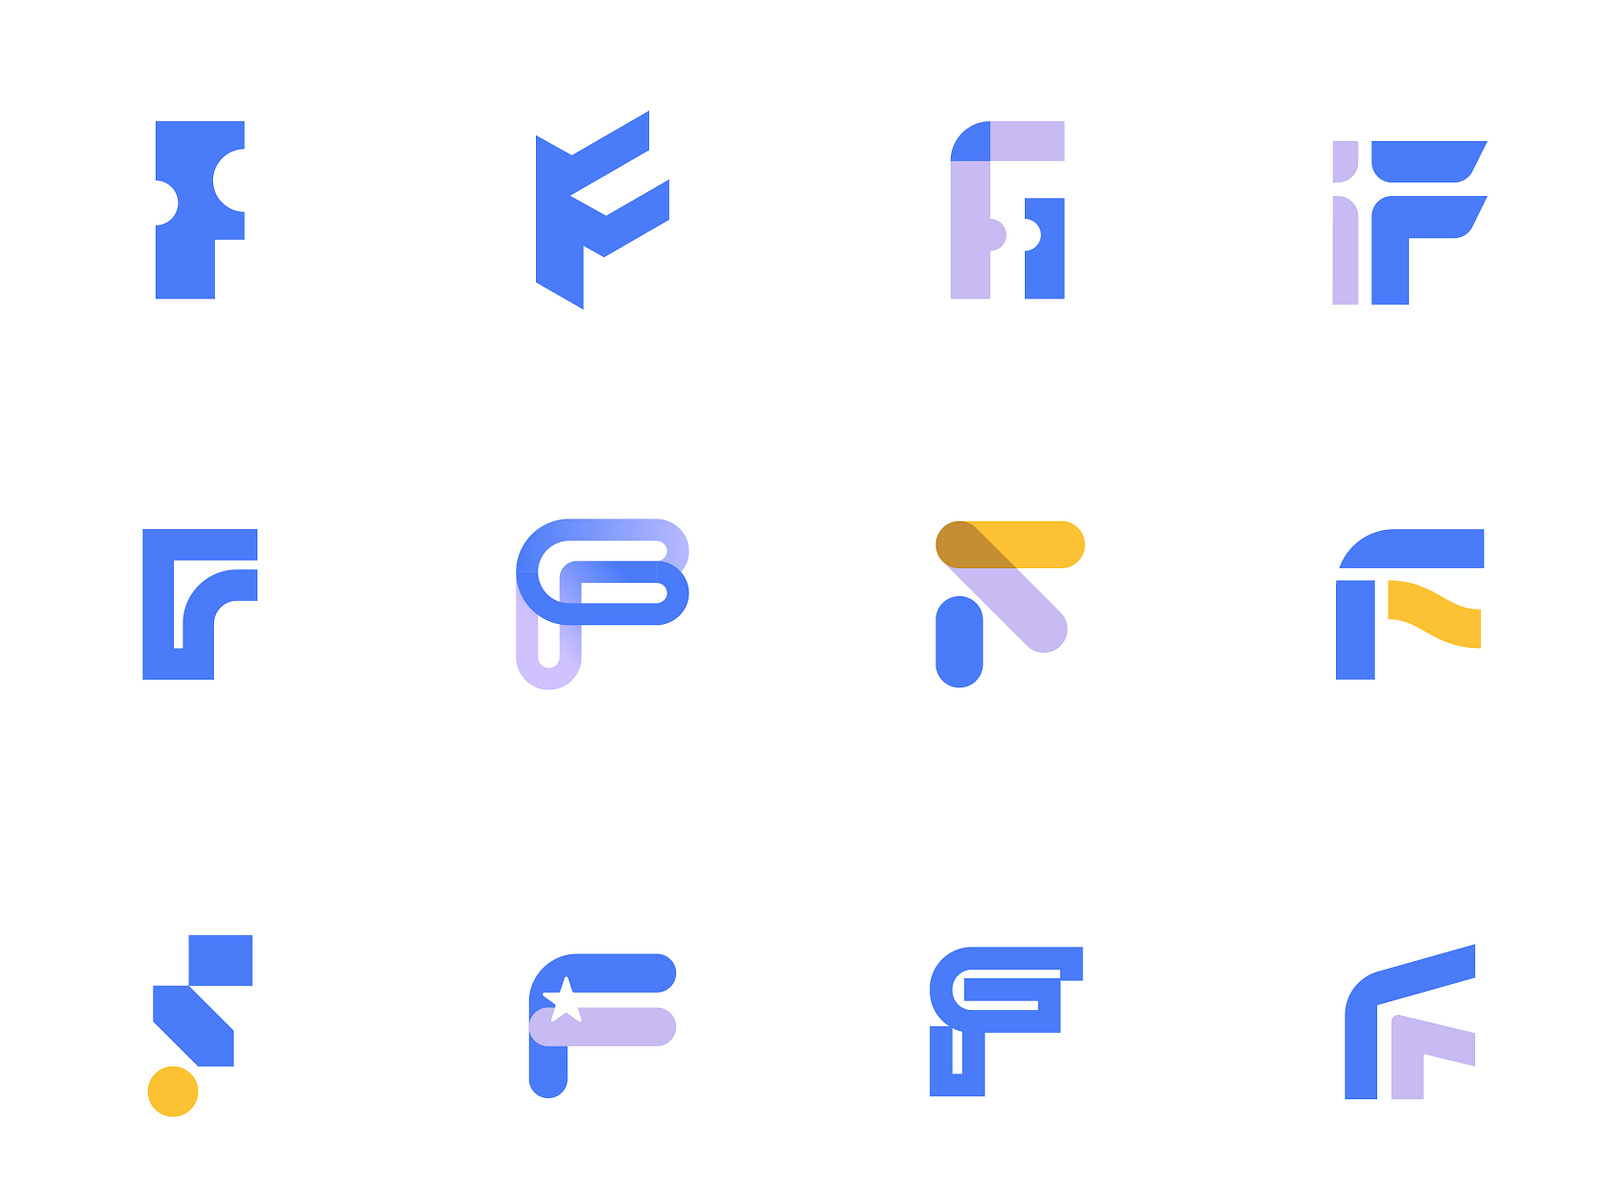 f letter exploration by Next Mahamud on Dribbble